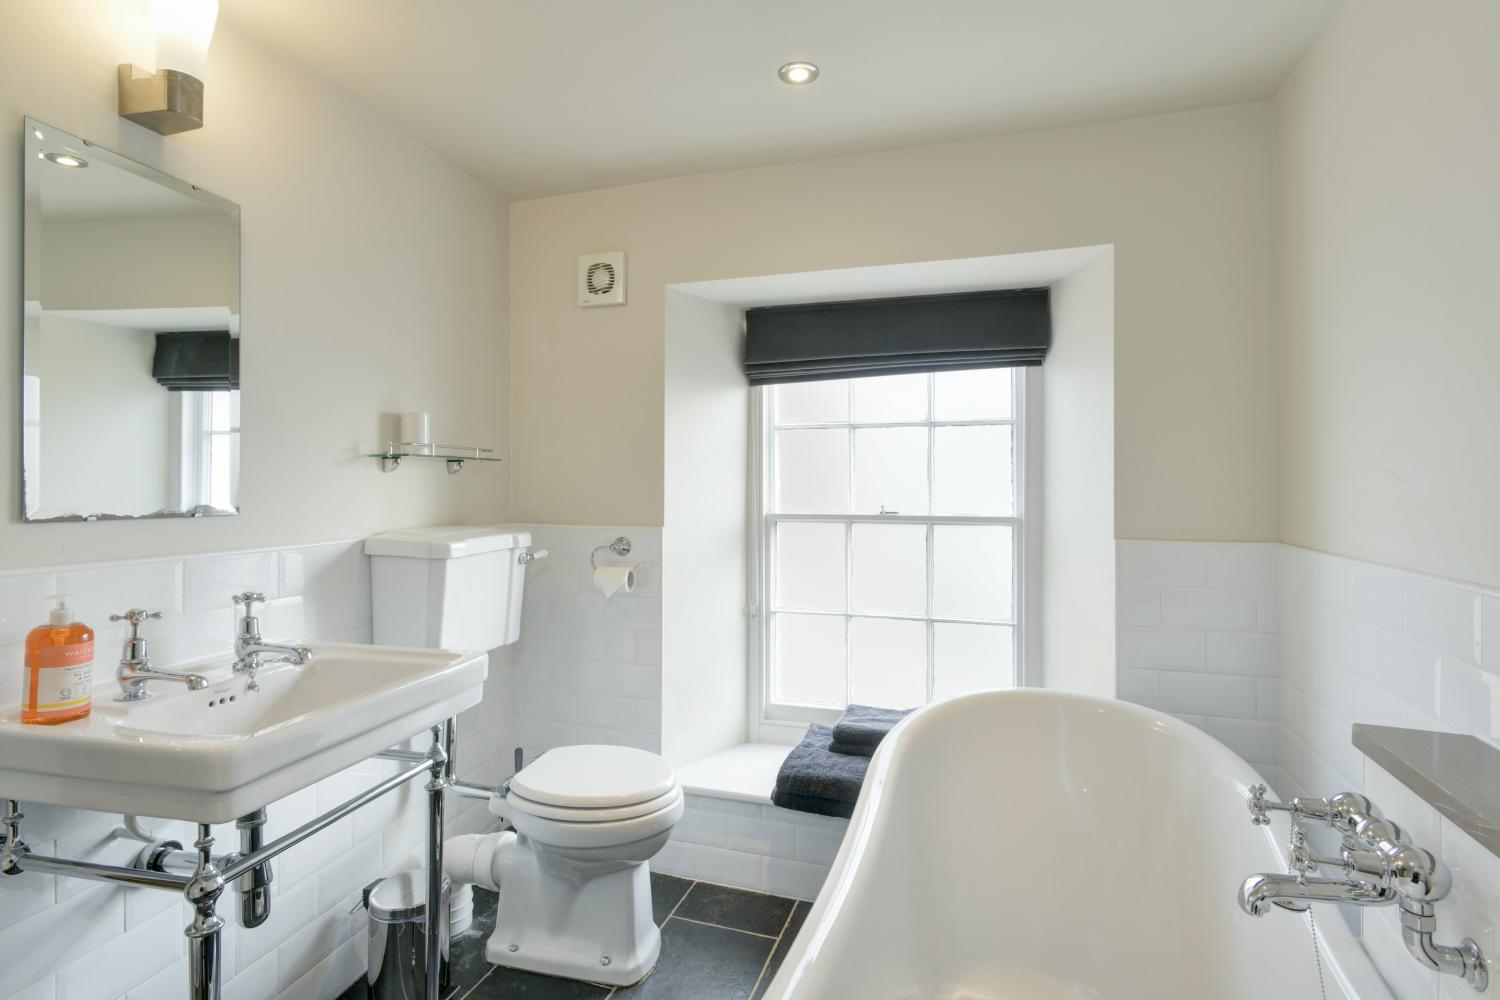 Four en-suite bathrooms with slipper bath and walk-in shower.